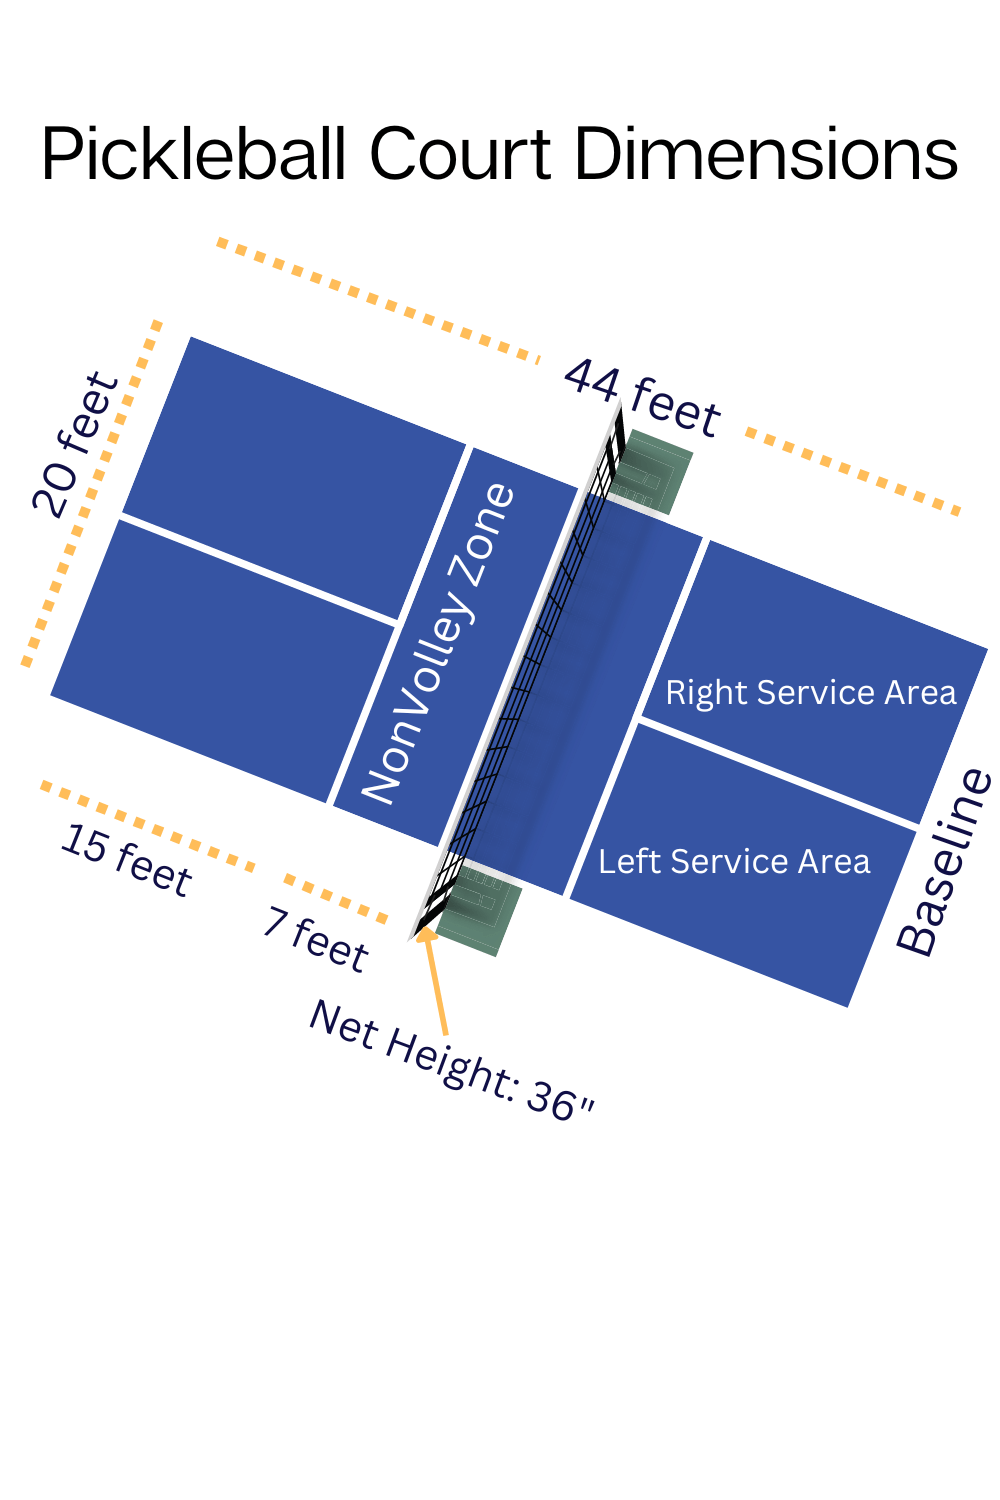 picture of pickleball court dimensions with names